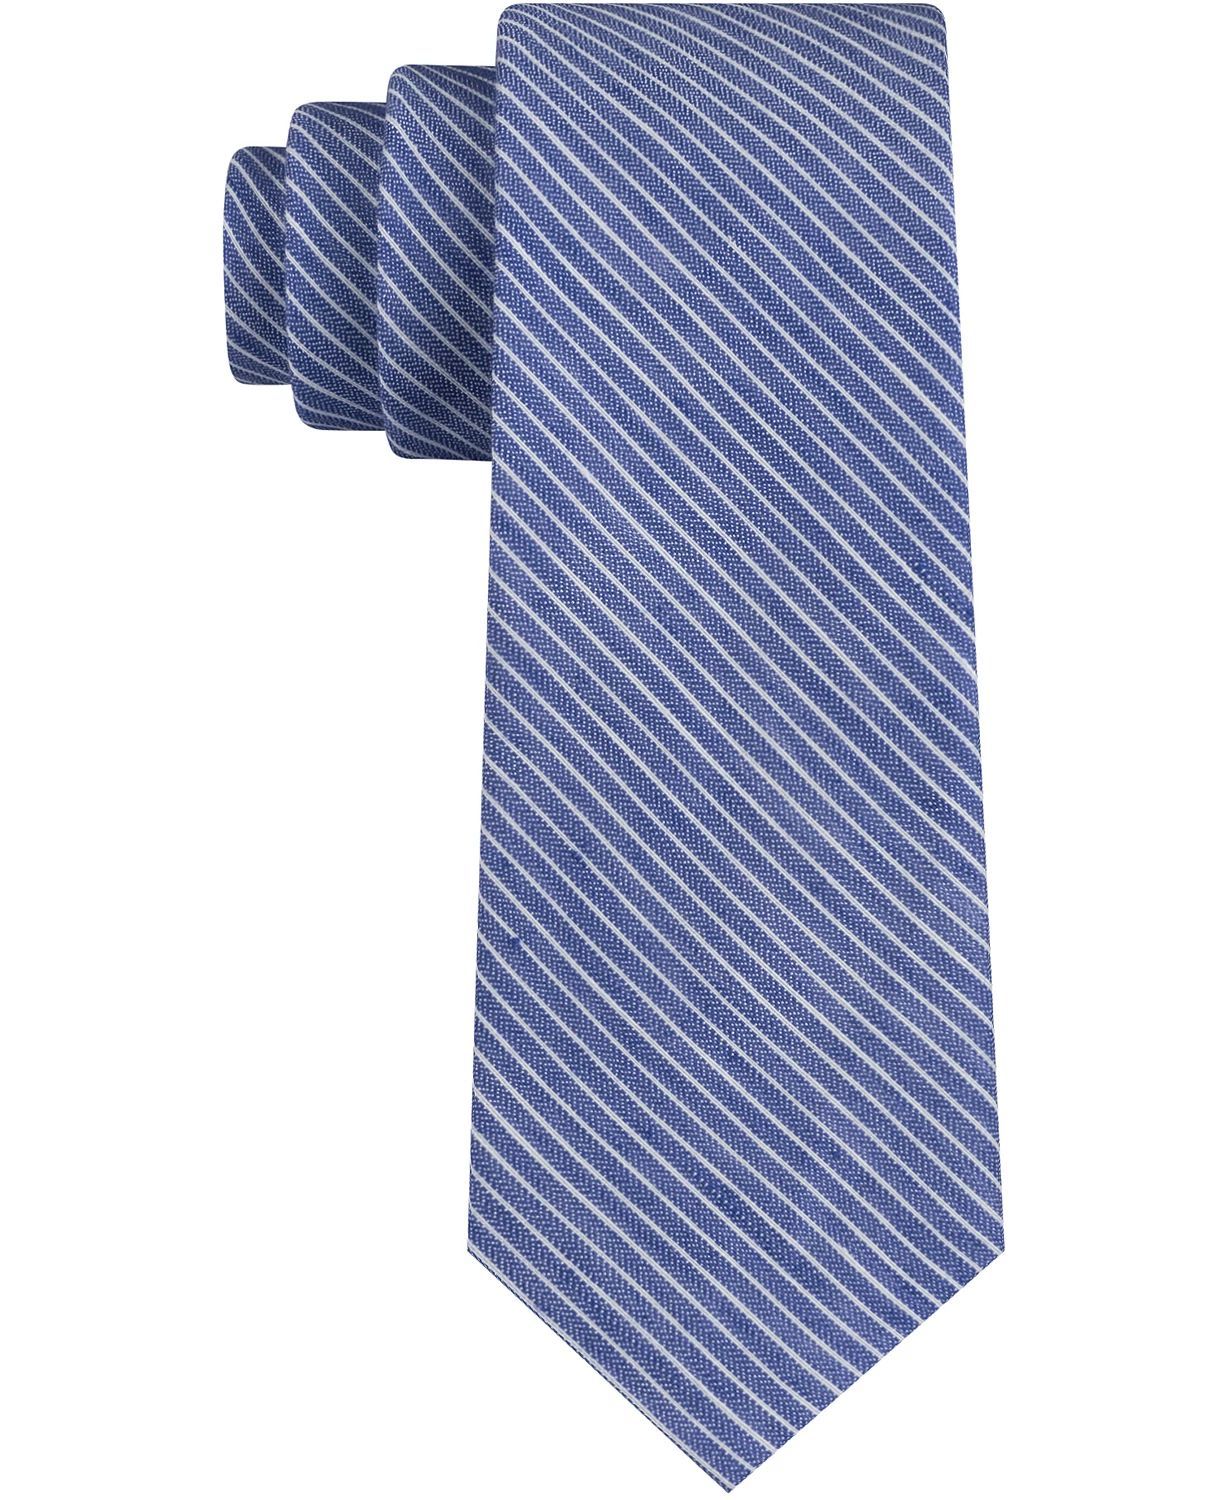 Color: Blues Size: One Size Pattern: Striped Type: Tie Width: Skinny (Material: Linen Blends